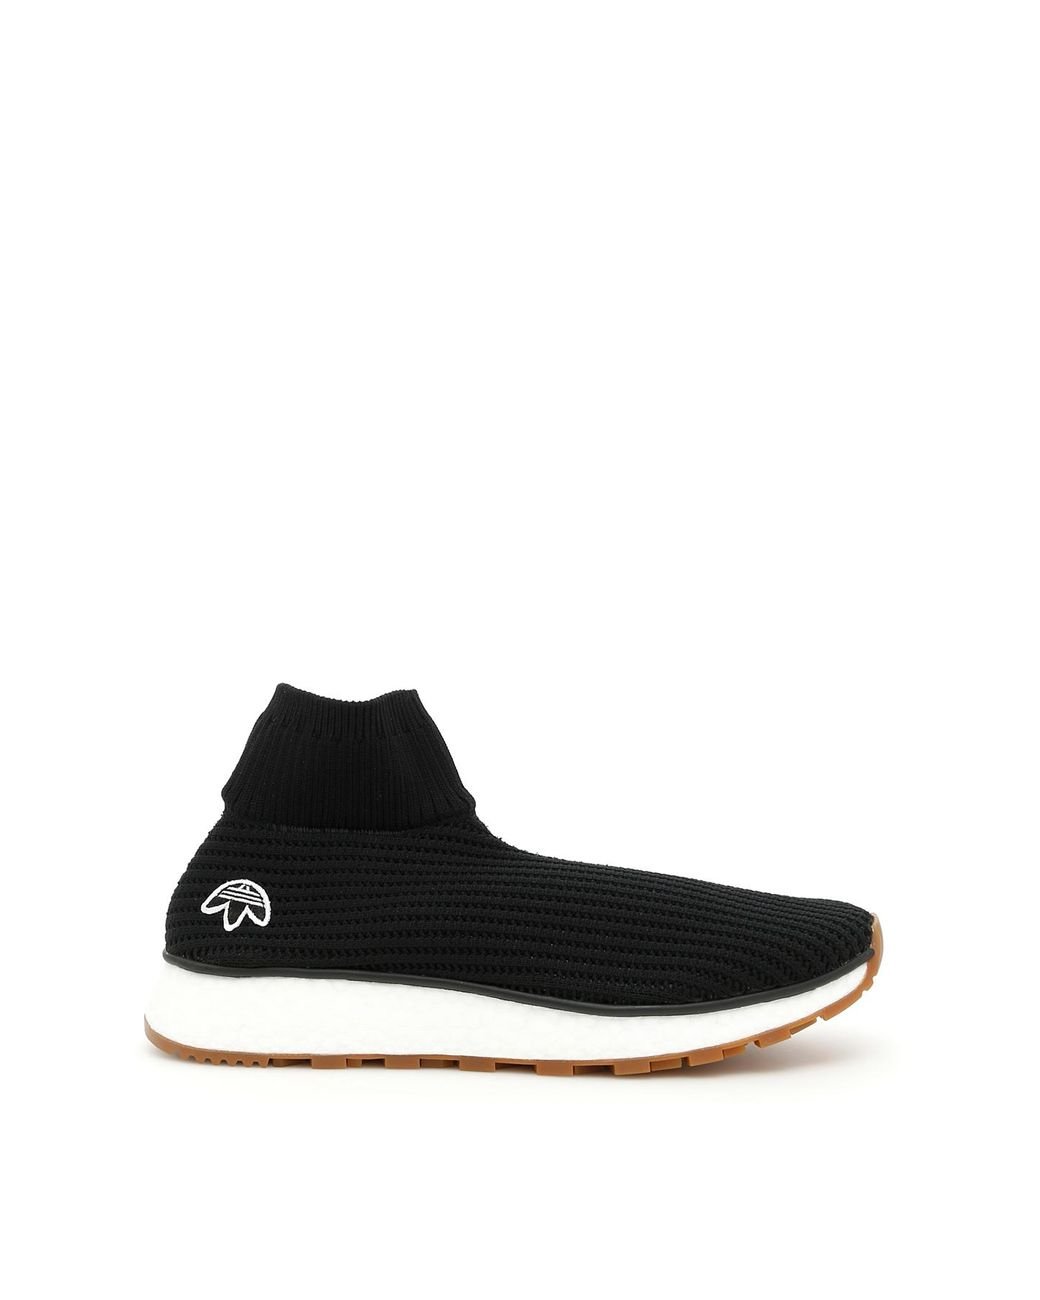 27.5 ☆ ALEXANDER WANG adidas RUN CLEAN promotions.microplanete.ma